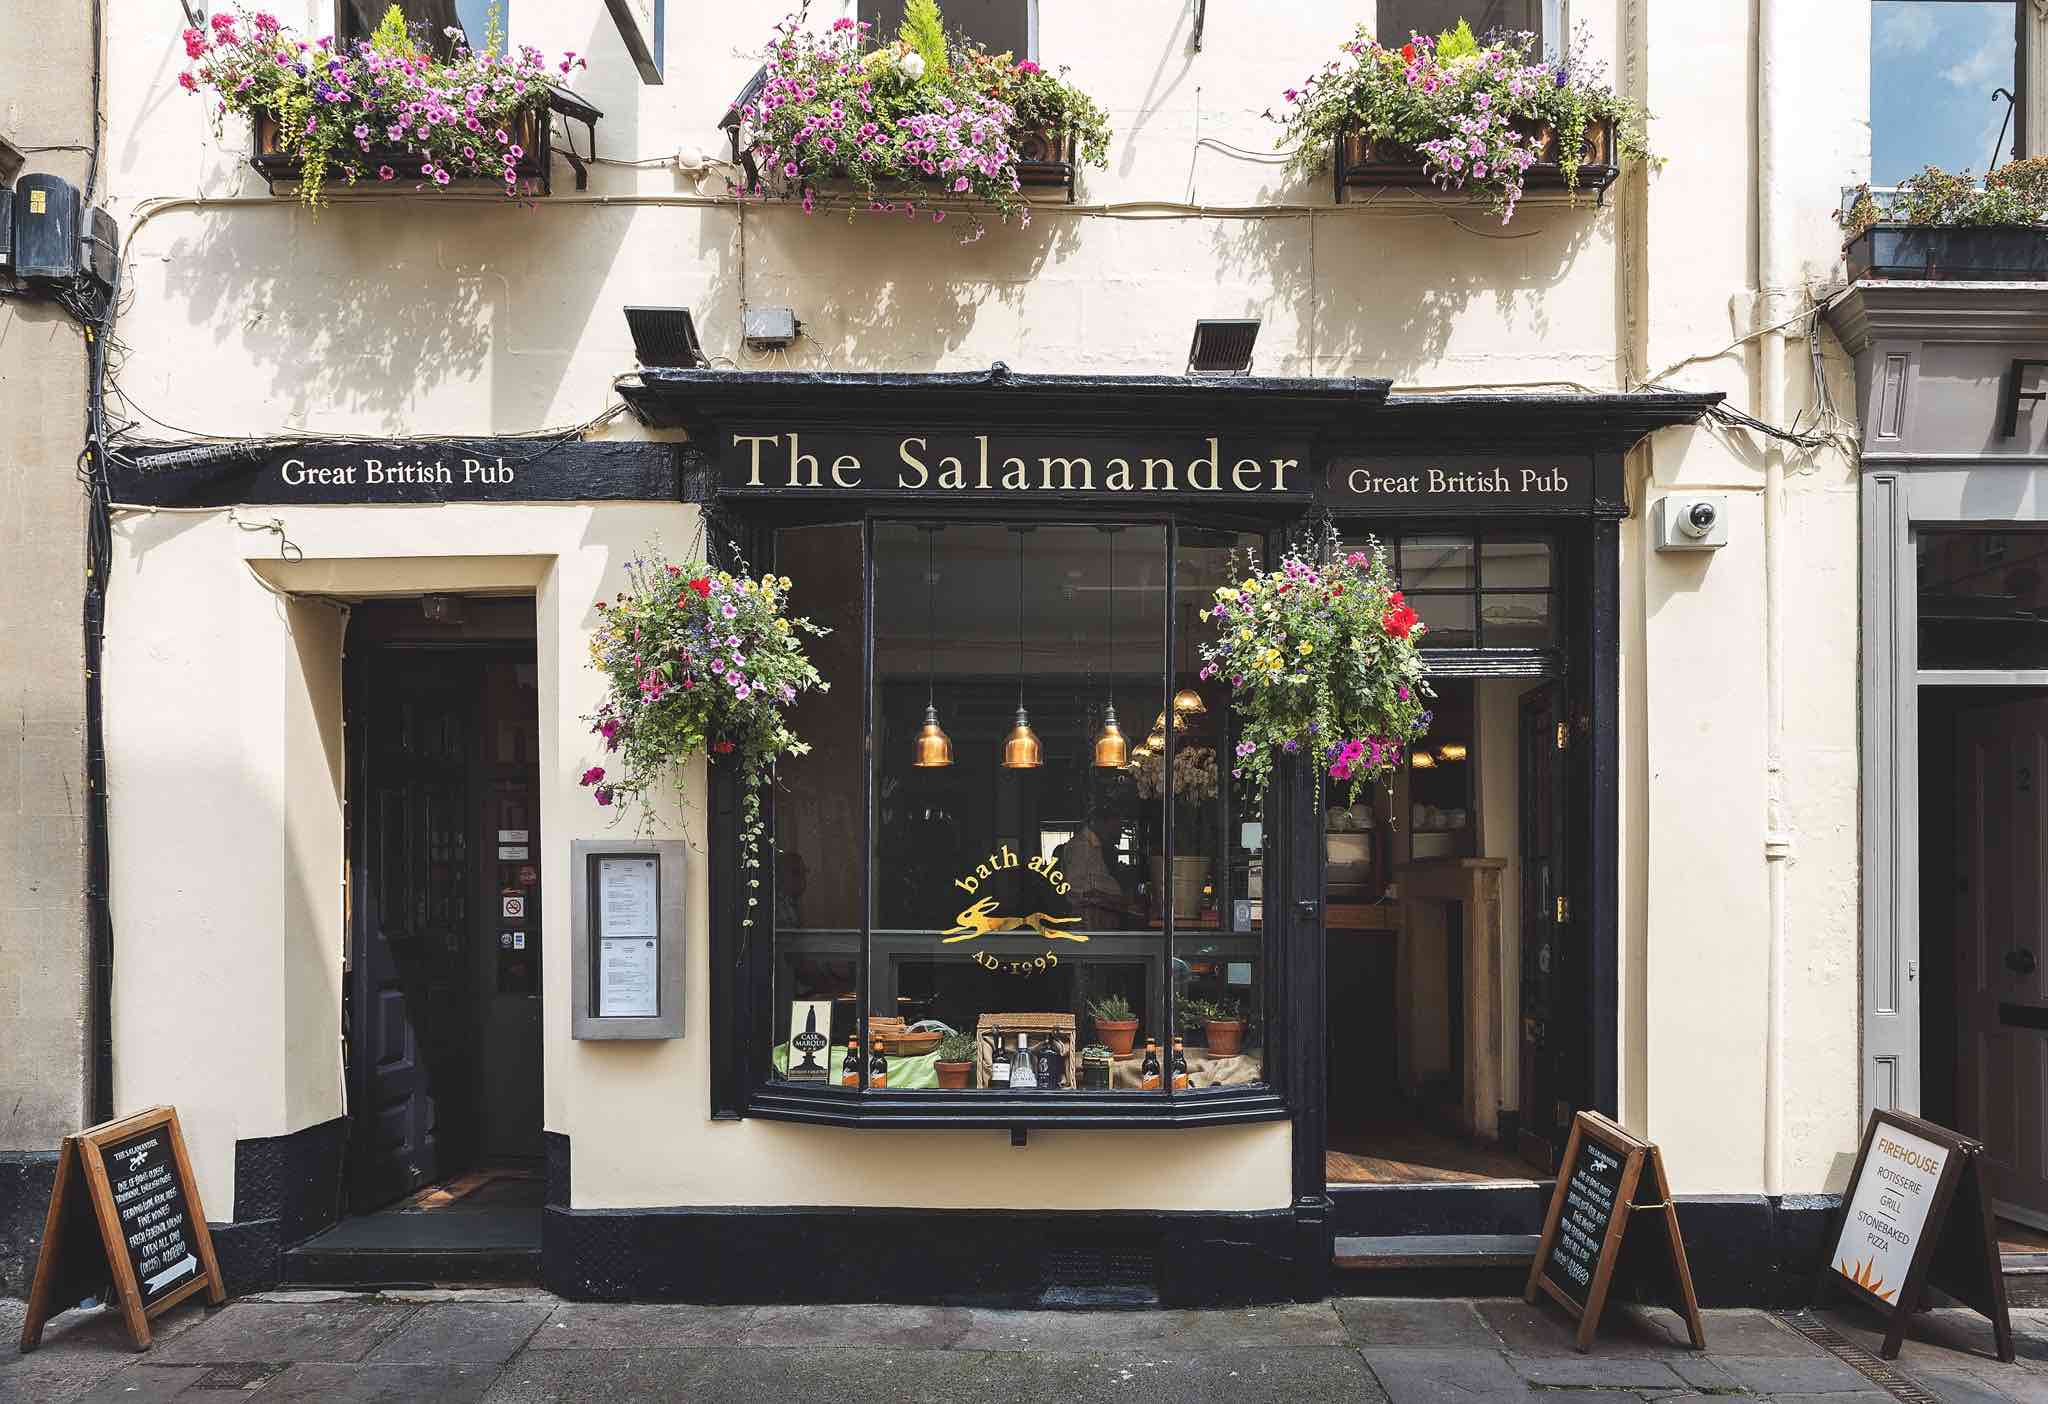 Pub facade in white and black paint rendering. A door is open and sign lettering says "The Salamander. Great British Pub".